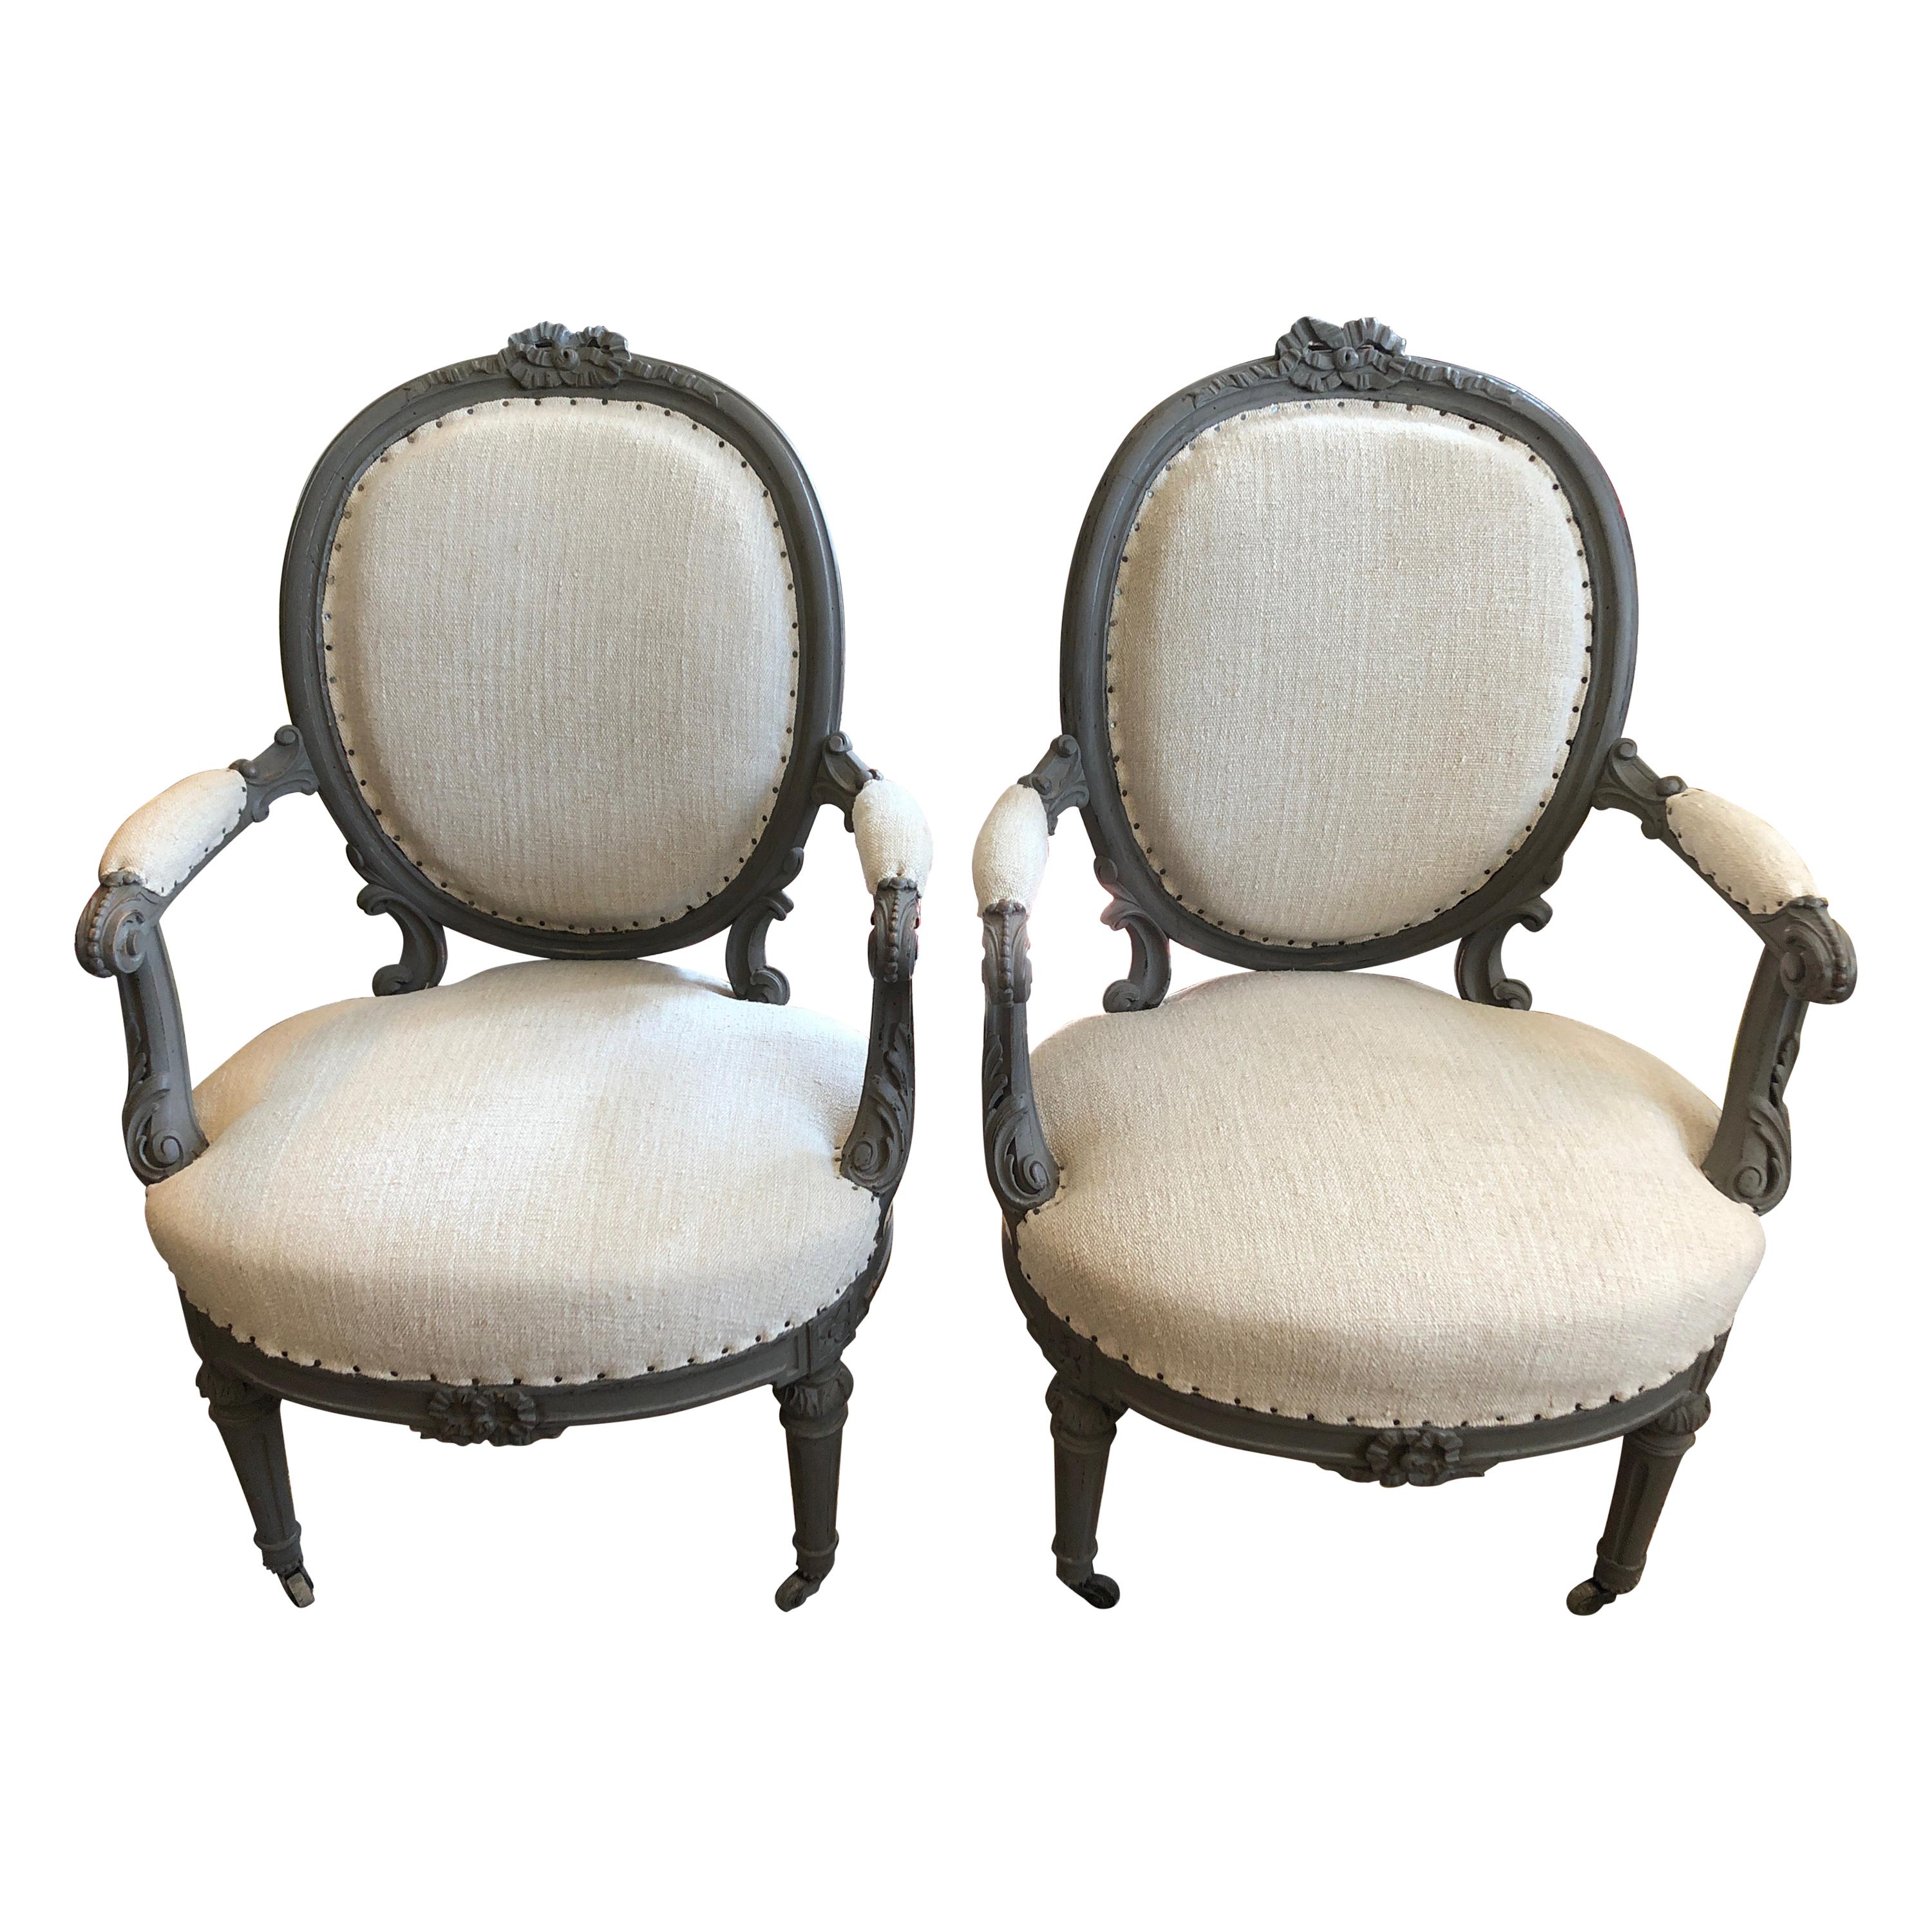 Romantic Pair of Grey Painted French Fauteuil Chairs with Oatmeal Upholstery